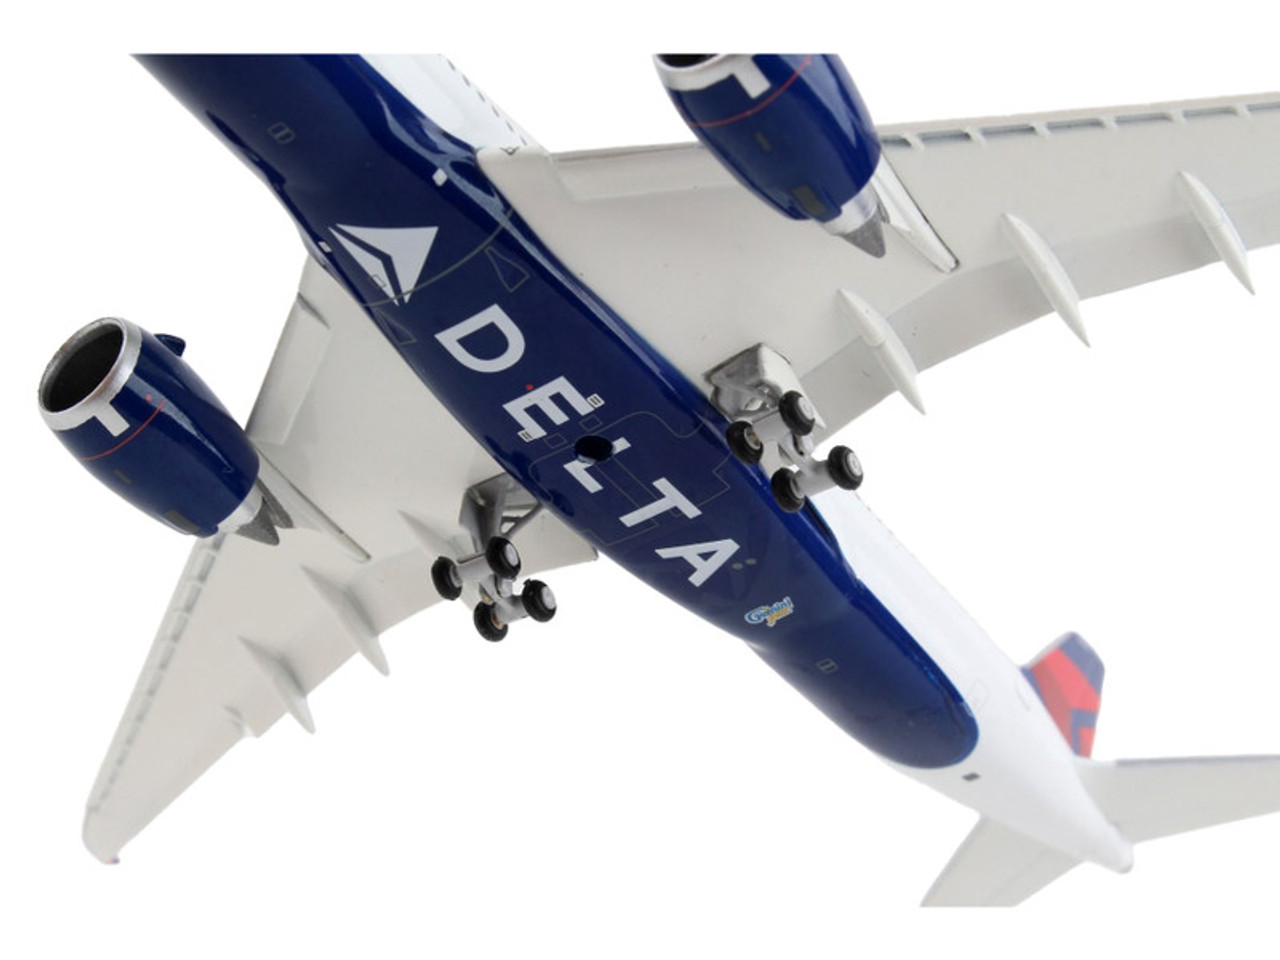 Airbus A350-900 Commercial Aircraft with Flaps Down "Delta Air Lines" White with Blue and Red Tail 1/400 Diecast Model Airplane by GeminiJets